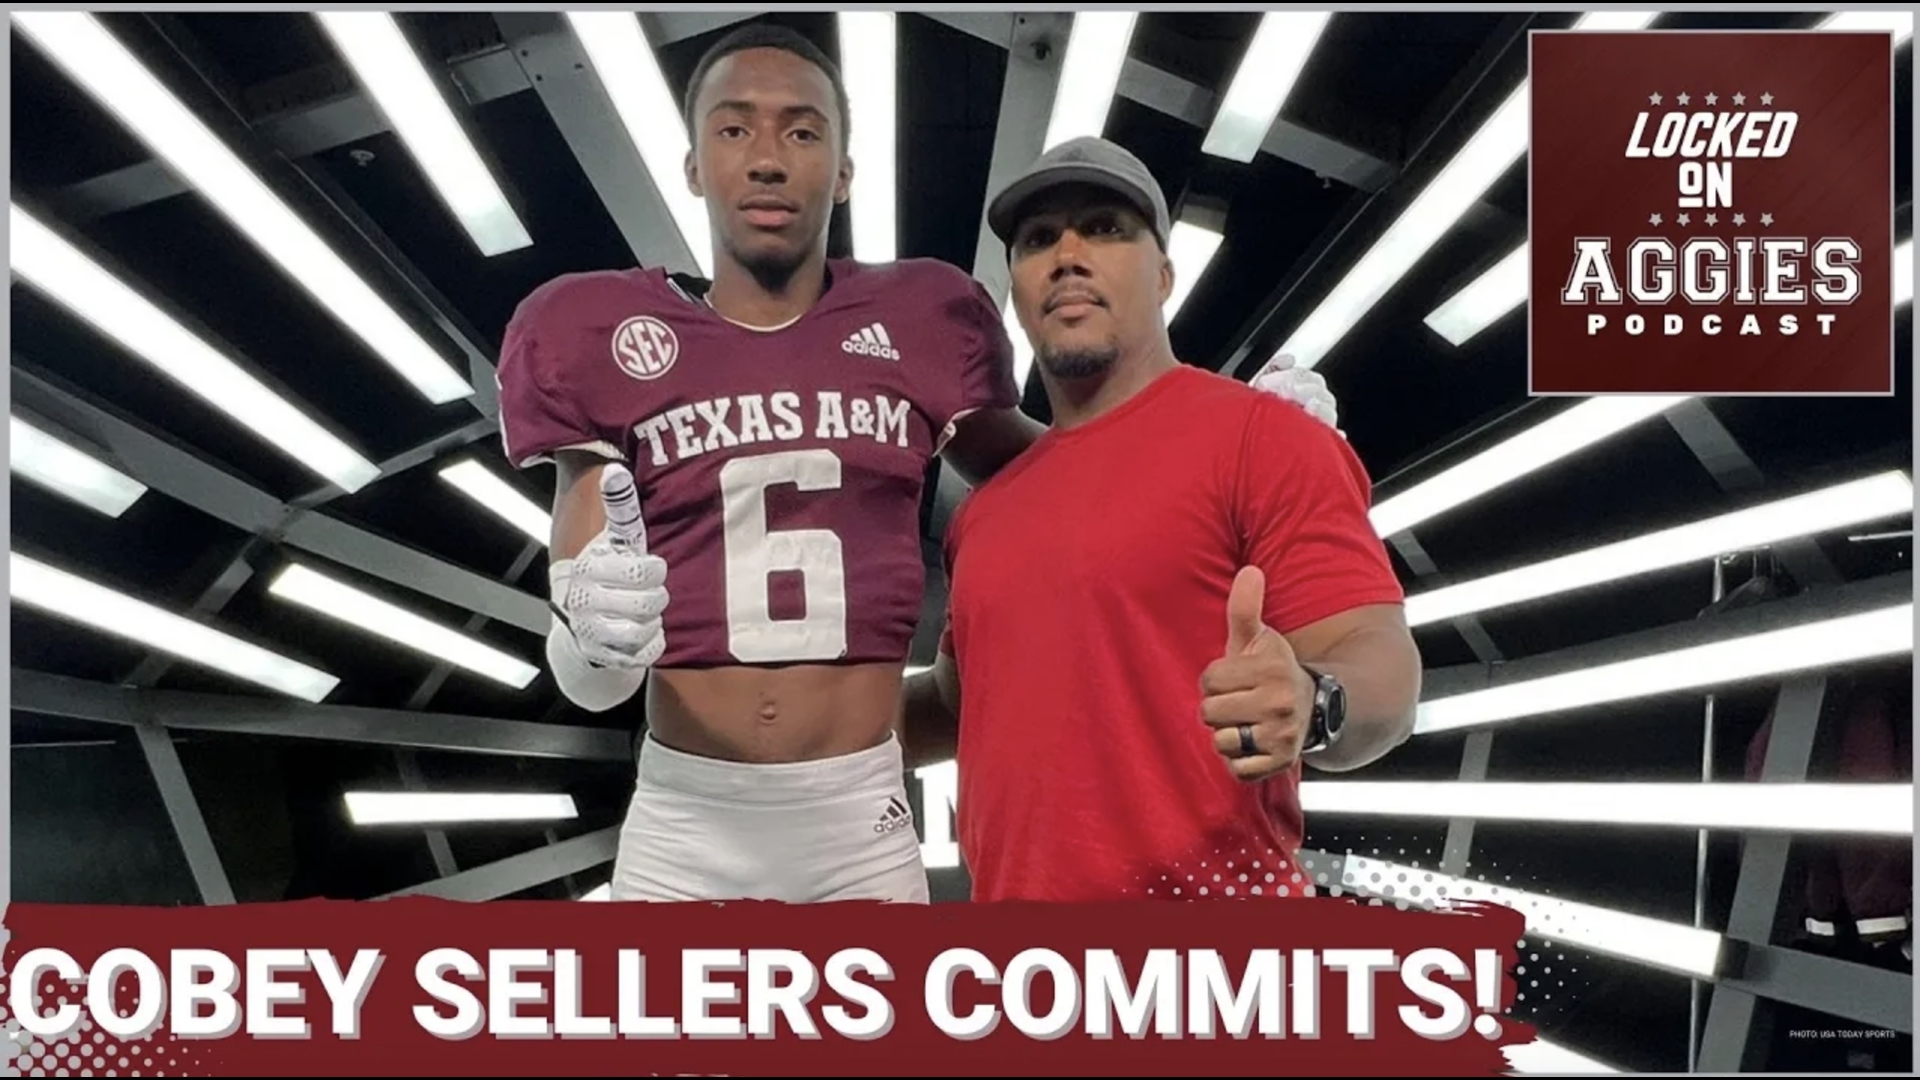 On today's episode of Locked On Aggies, host Andrew Stefaniak breaks down Cobey Sellers' commitment and what this means for Texas A&M Aggies.